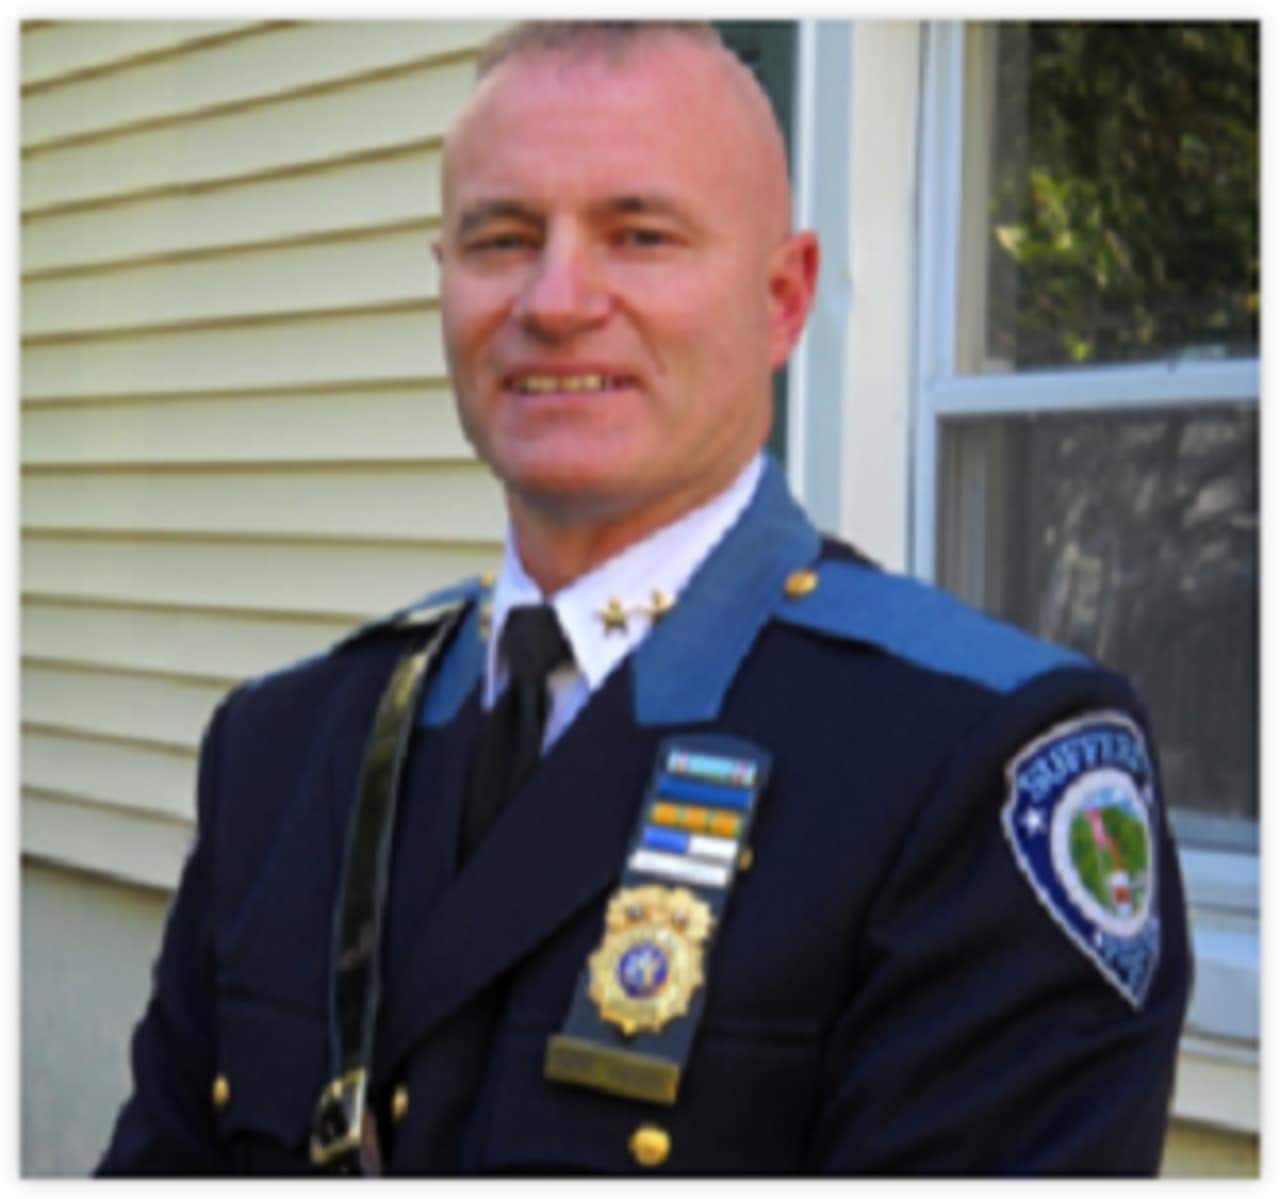 Suffern police Chief Clarke Osborn will meet with locals at Bagel Train in Suffern May 7.